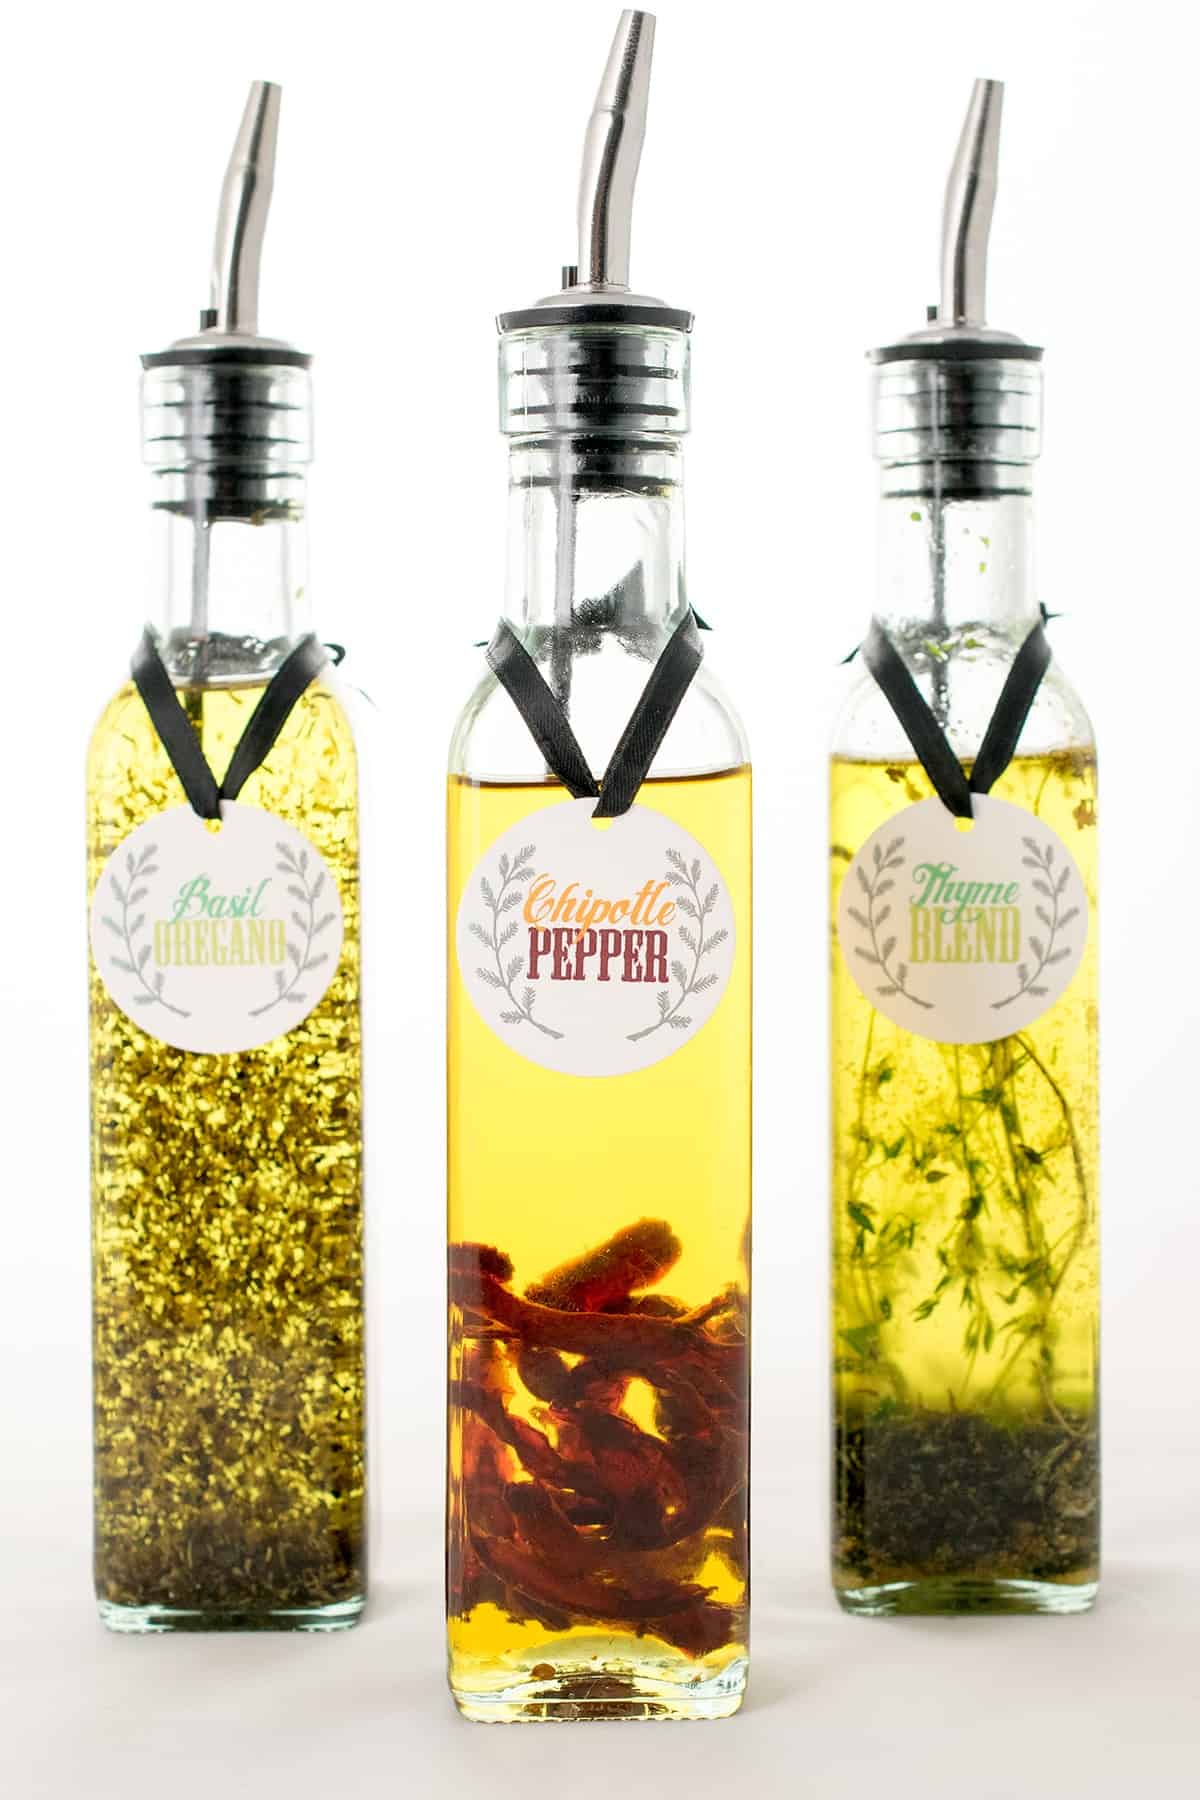 Three glass bottles of infused oil including thyme, chipotle pepper, and basil oregano, with printed labels and pour spouts. 